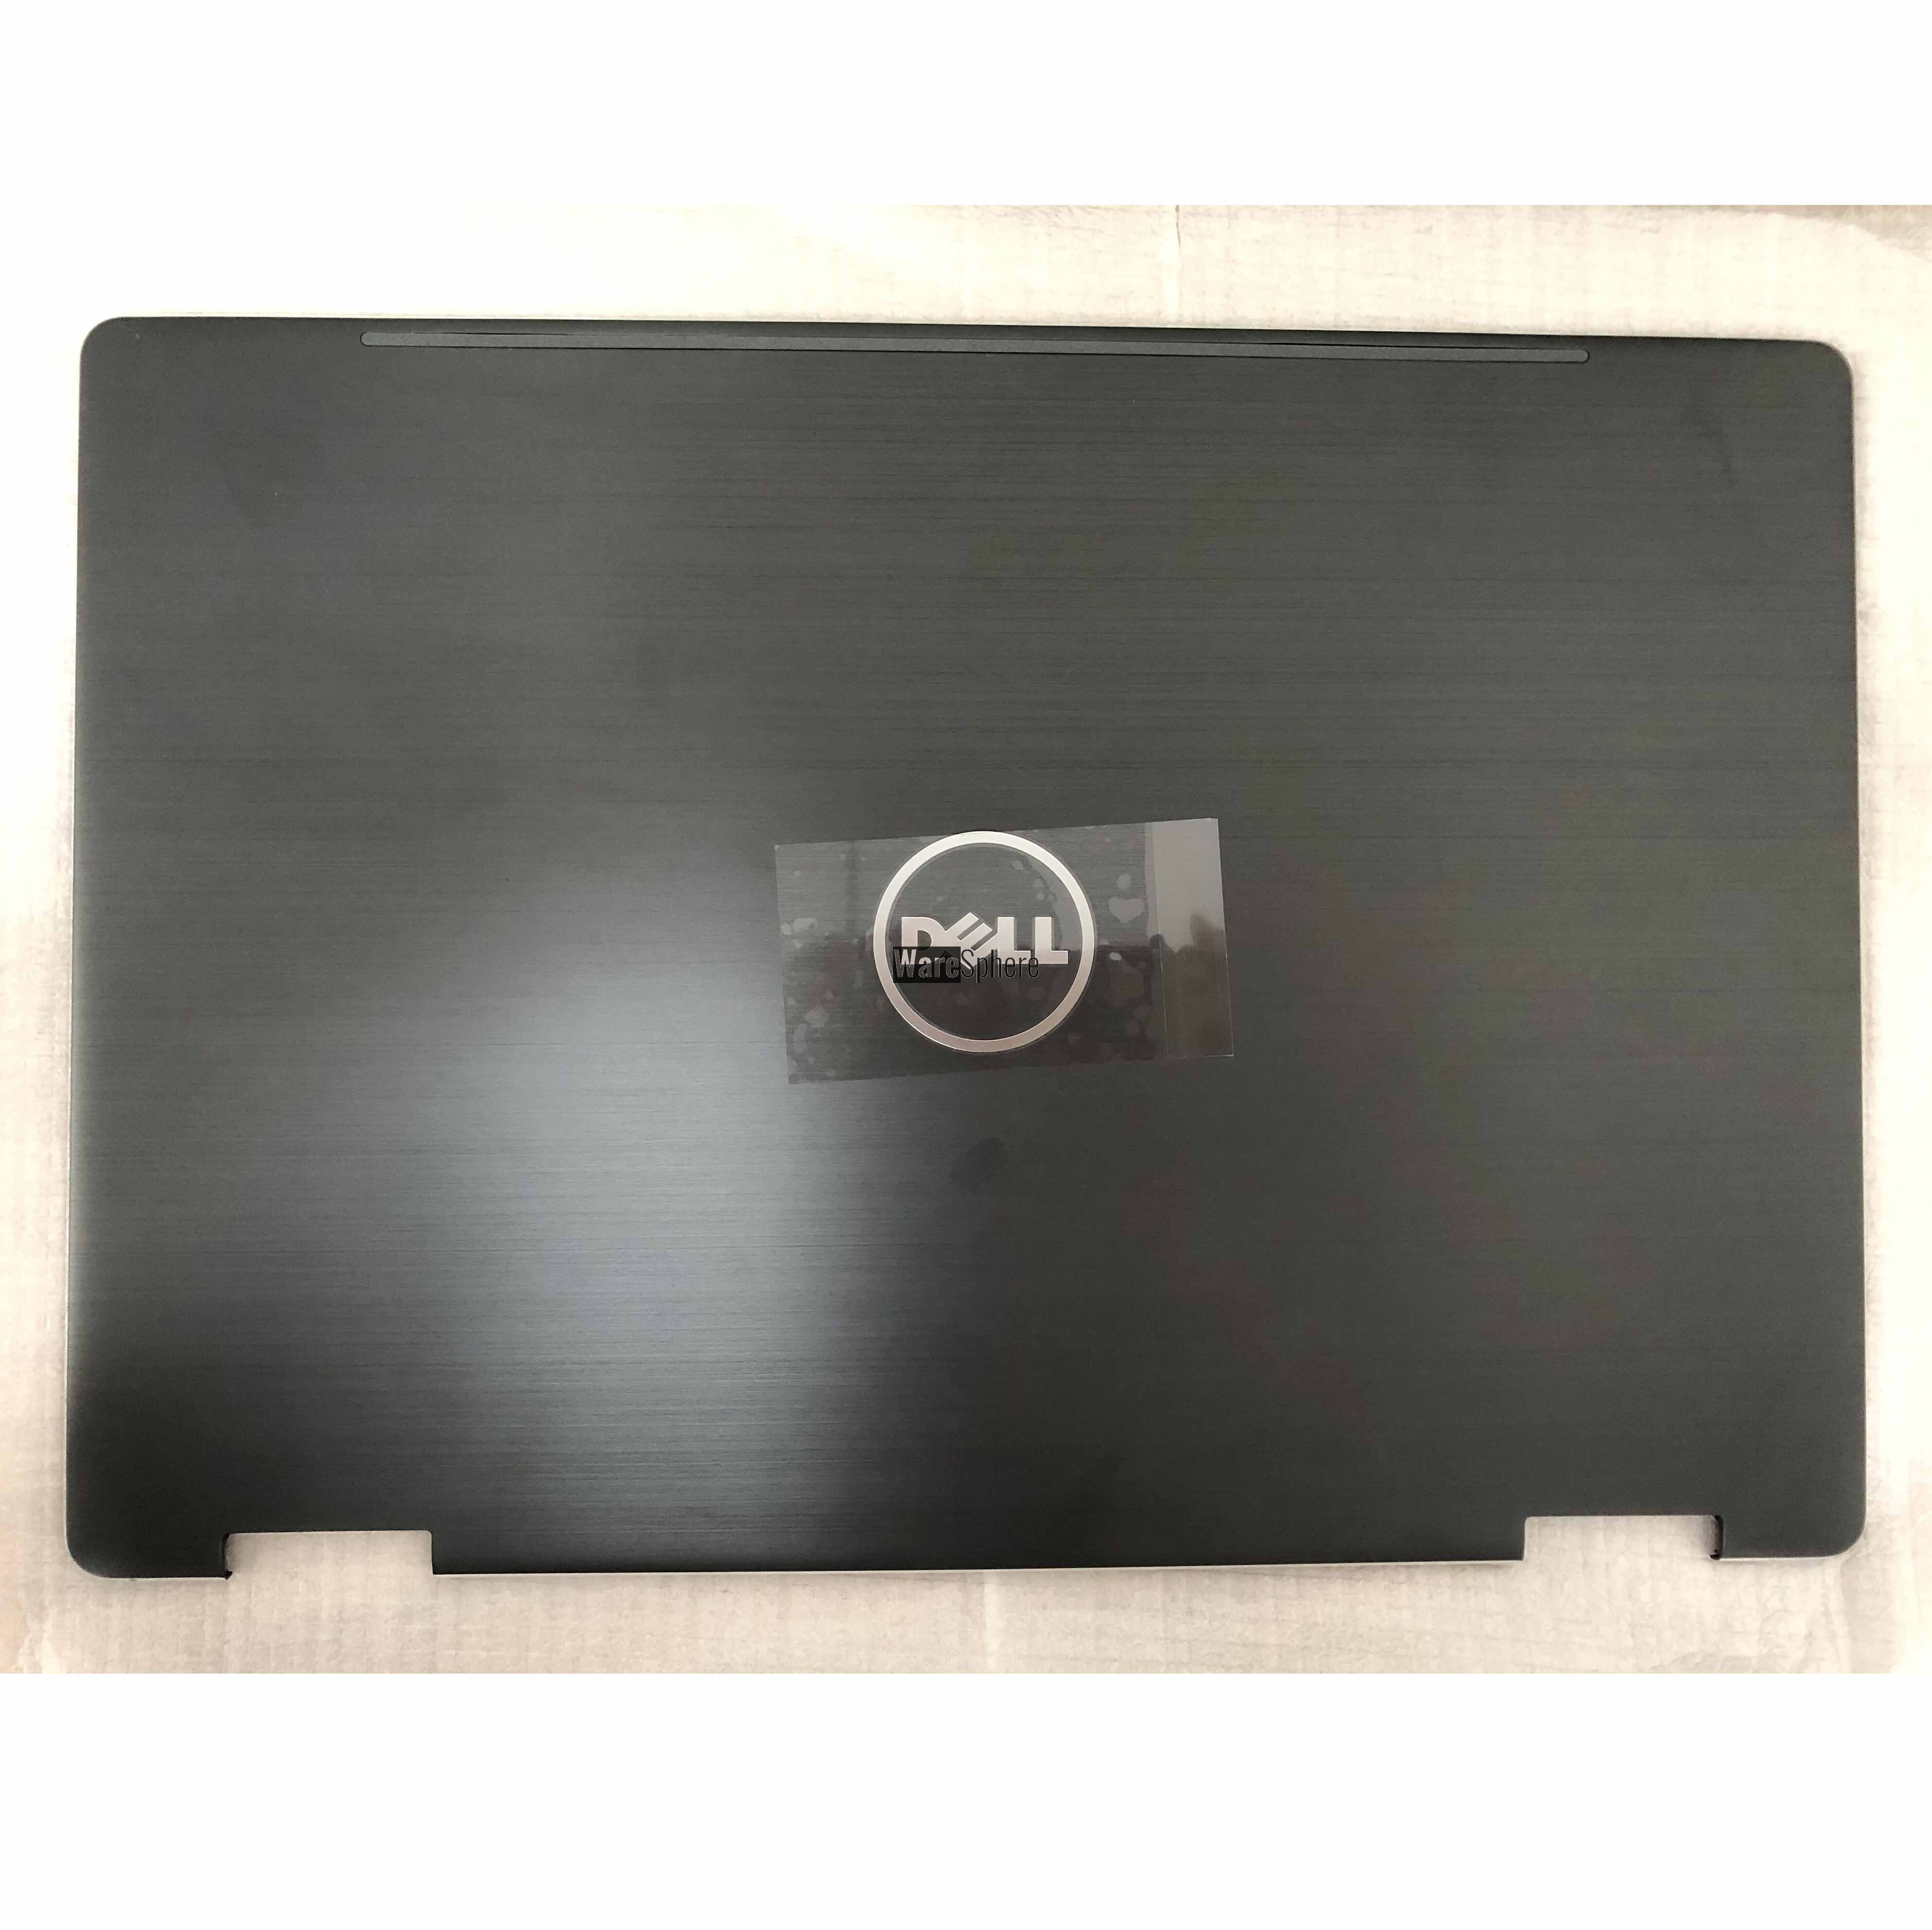 LCD Rear Back Cover For Dell Latitude 13 3379 WTMYX 0WTMYX 460.0BC01.0003